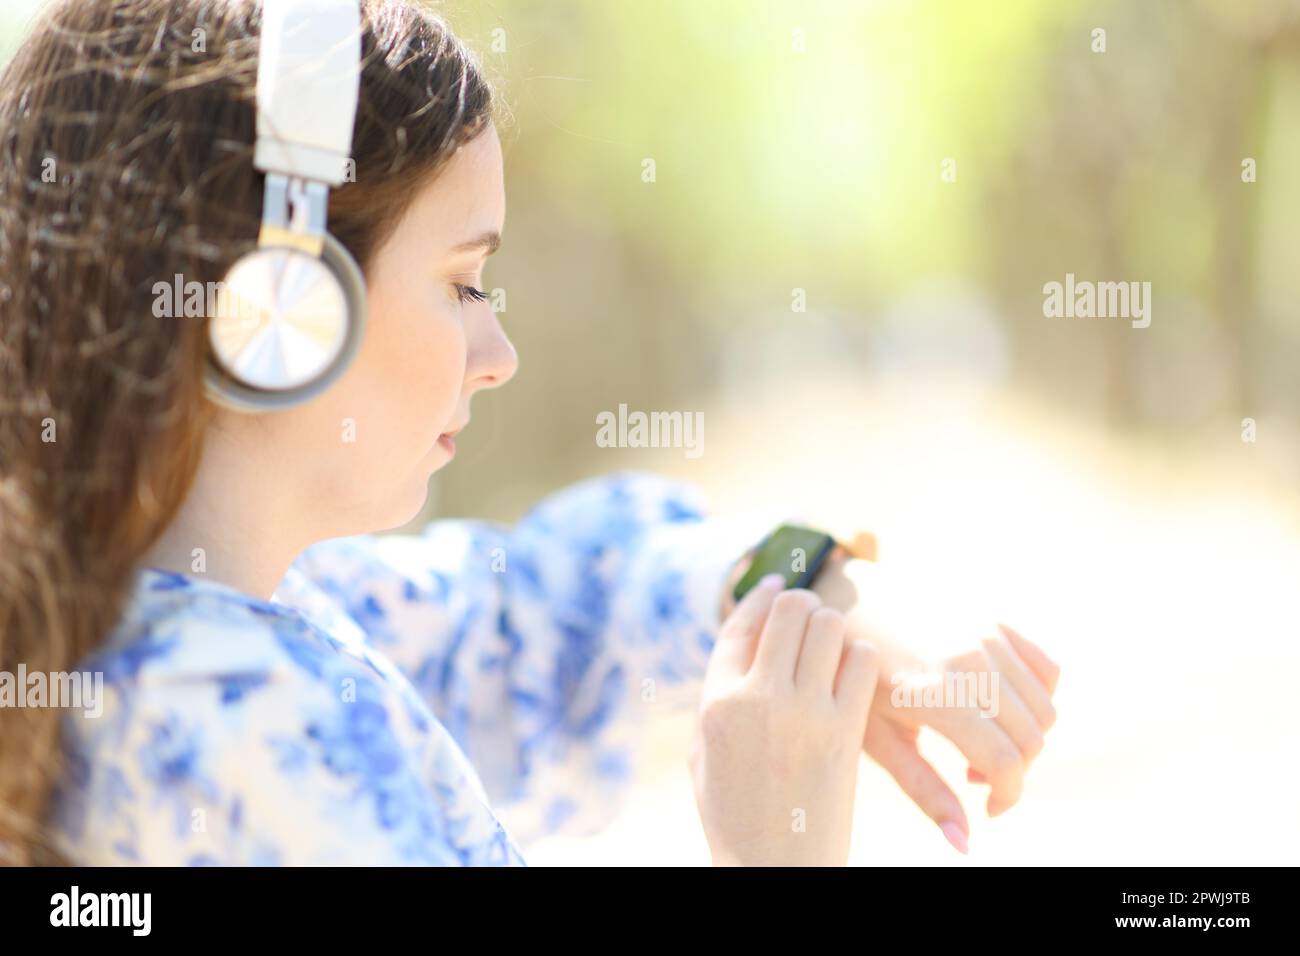 Profile of a woman listening audio with headphone using smartwatch in a park Stock Photo